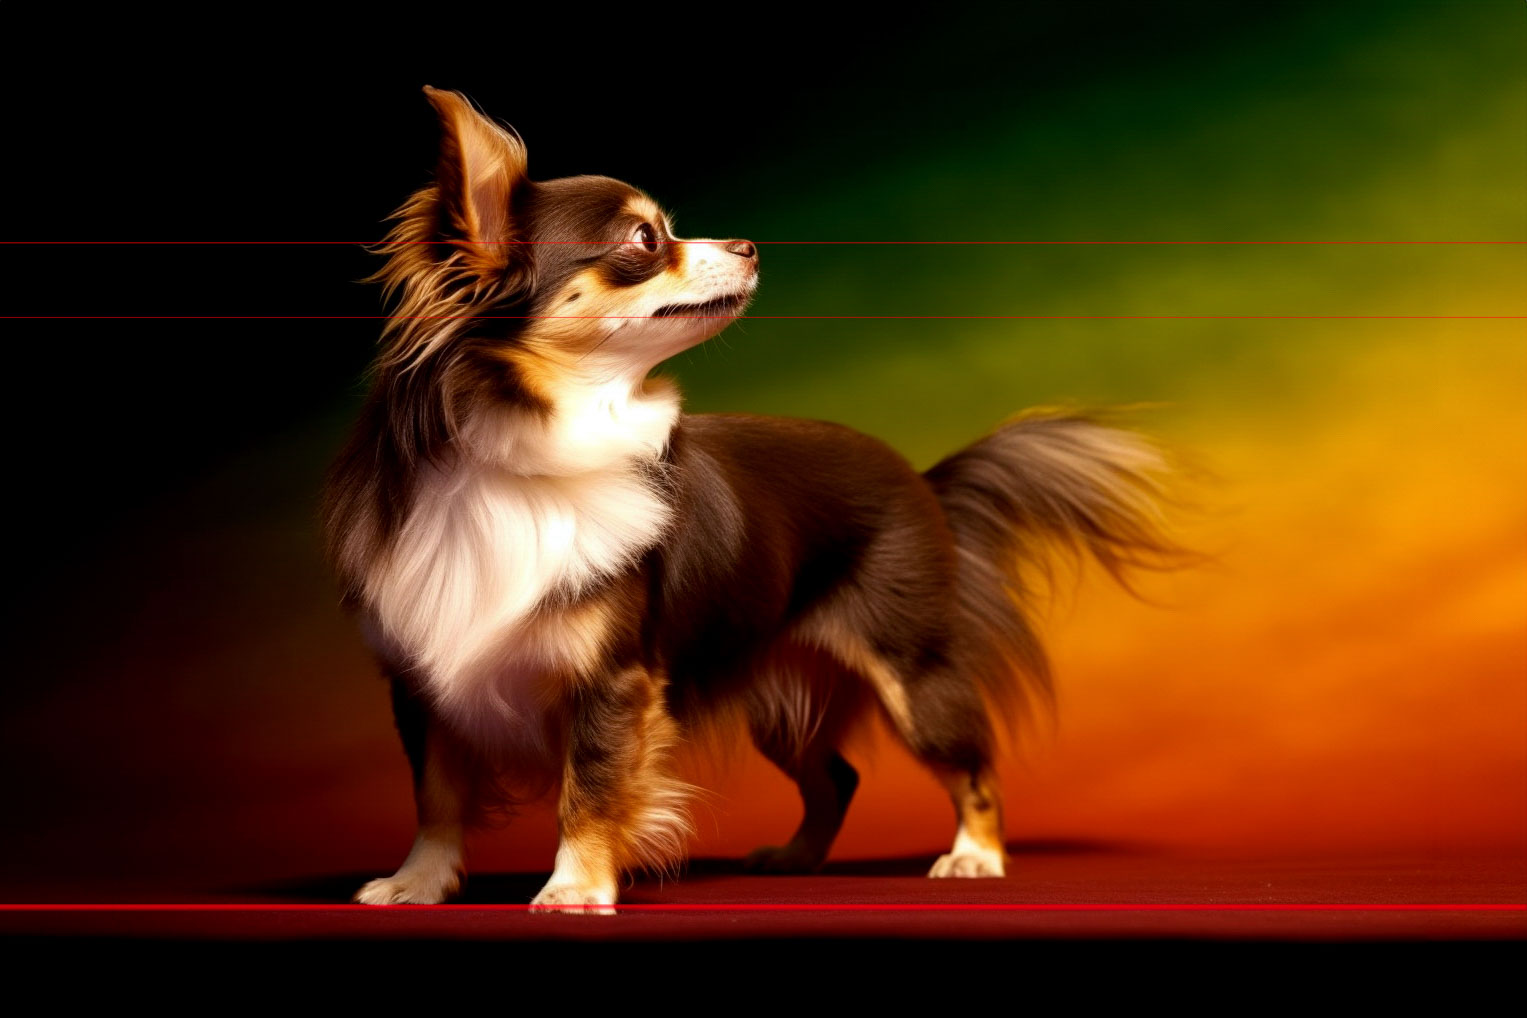 This artwork showcases a longhaired Chihuahua standing in a profile pose. Its head turned to look attentively around the back, with its ears perked up and longhaired plume tail curved upwards. A sweeping dramatic and vibrant backdrop reminiscent of Mexico's flag.